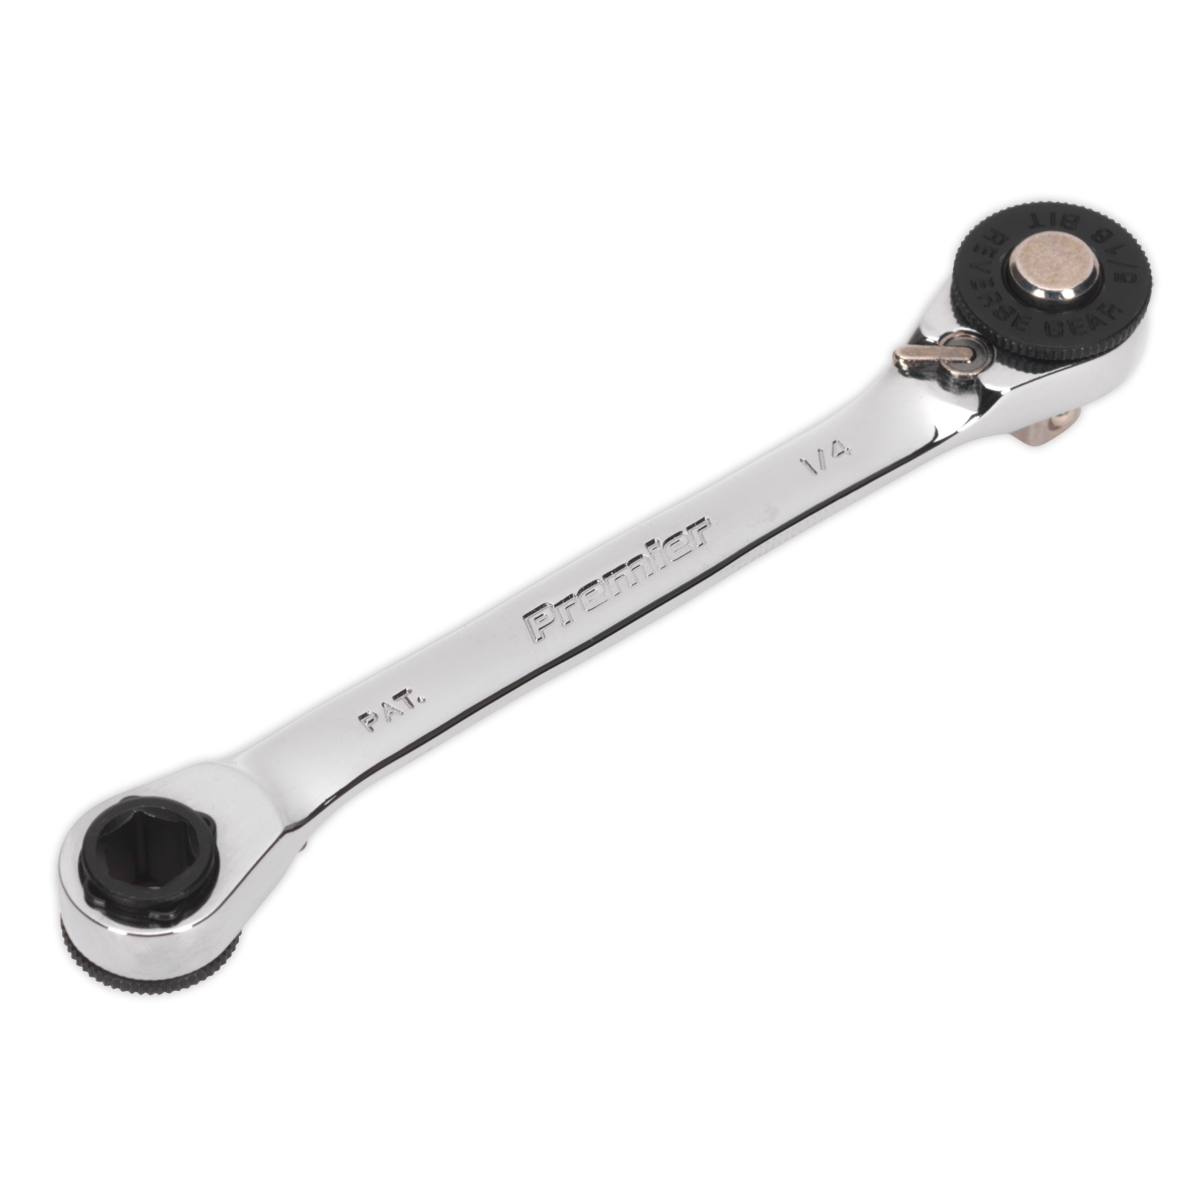 Ratchet Spanner 1/4"Hex x 5/16"Hex Drive with 1/4"Sq Drive Adaptor - AK6967 - Farming Parts